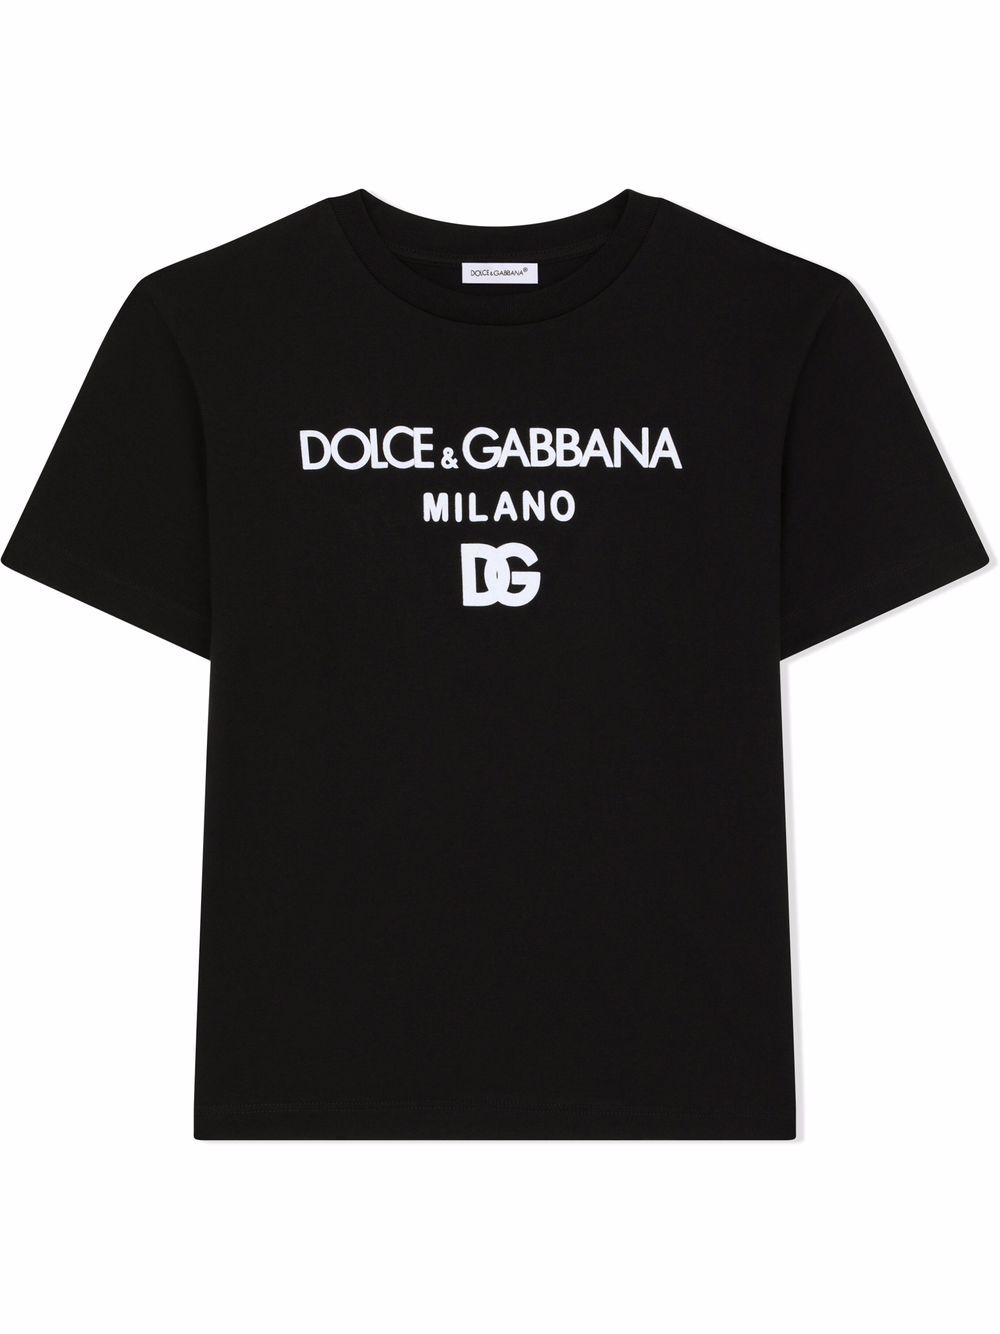 Shop Dolce & Gabbana Kids logo print T-shirt with Express Delivery ...